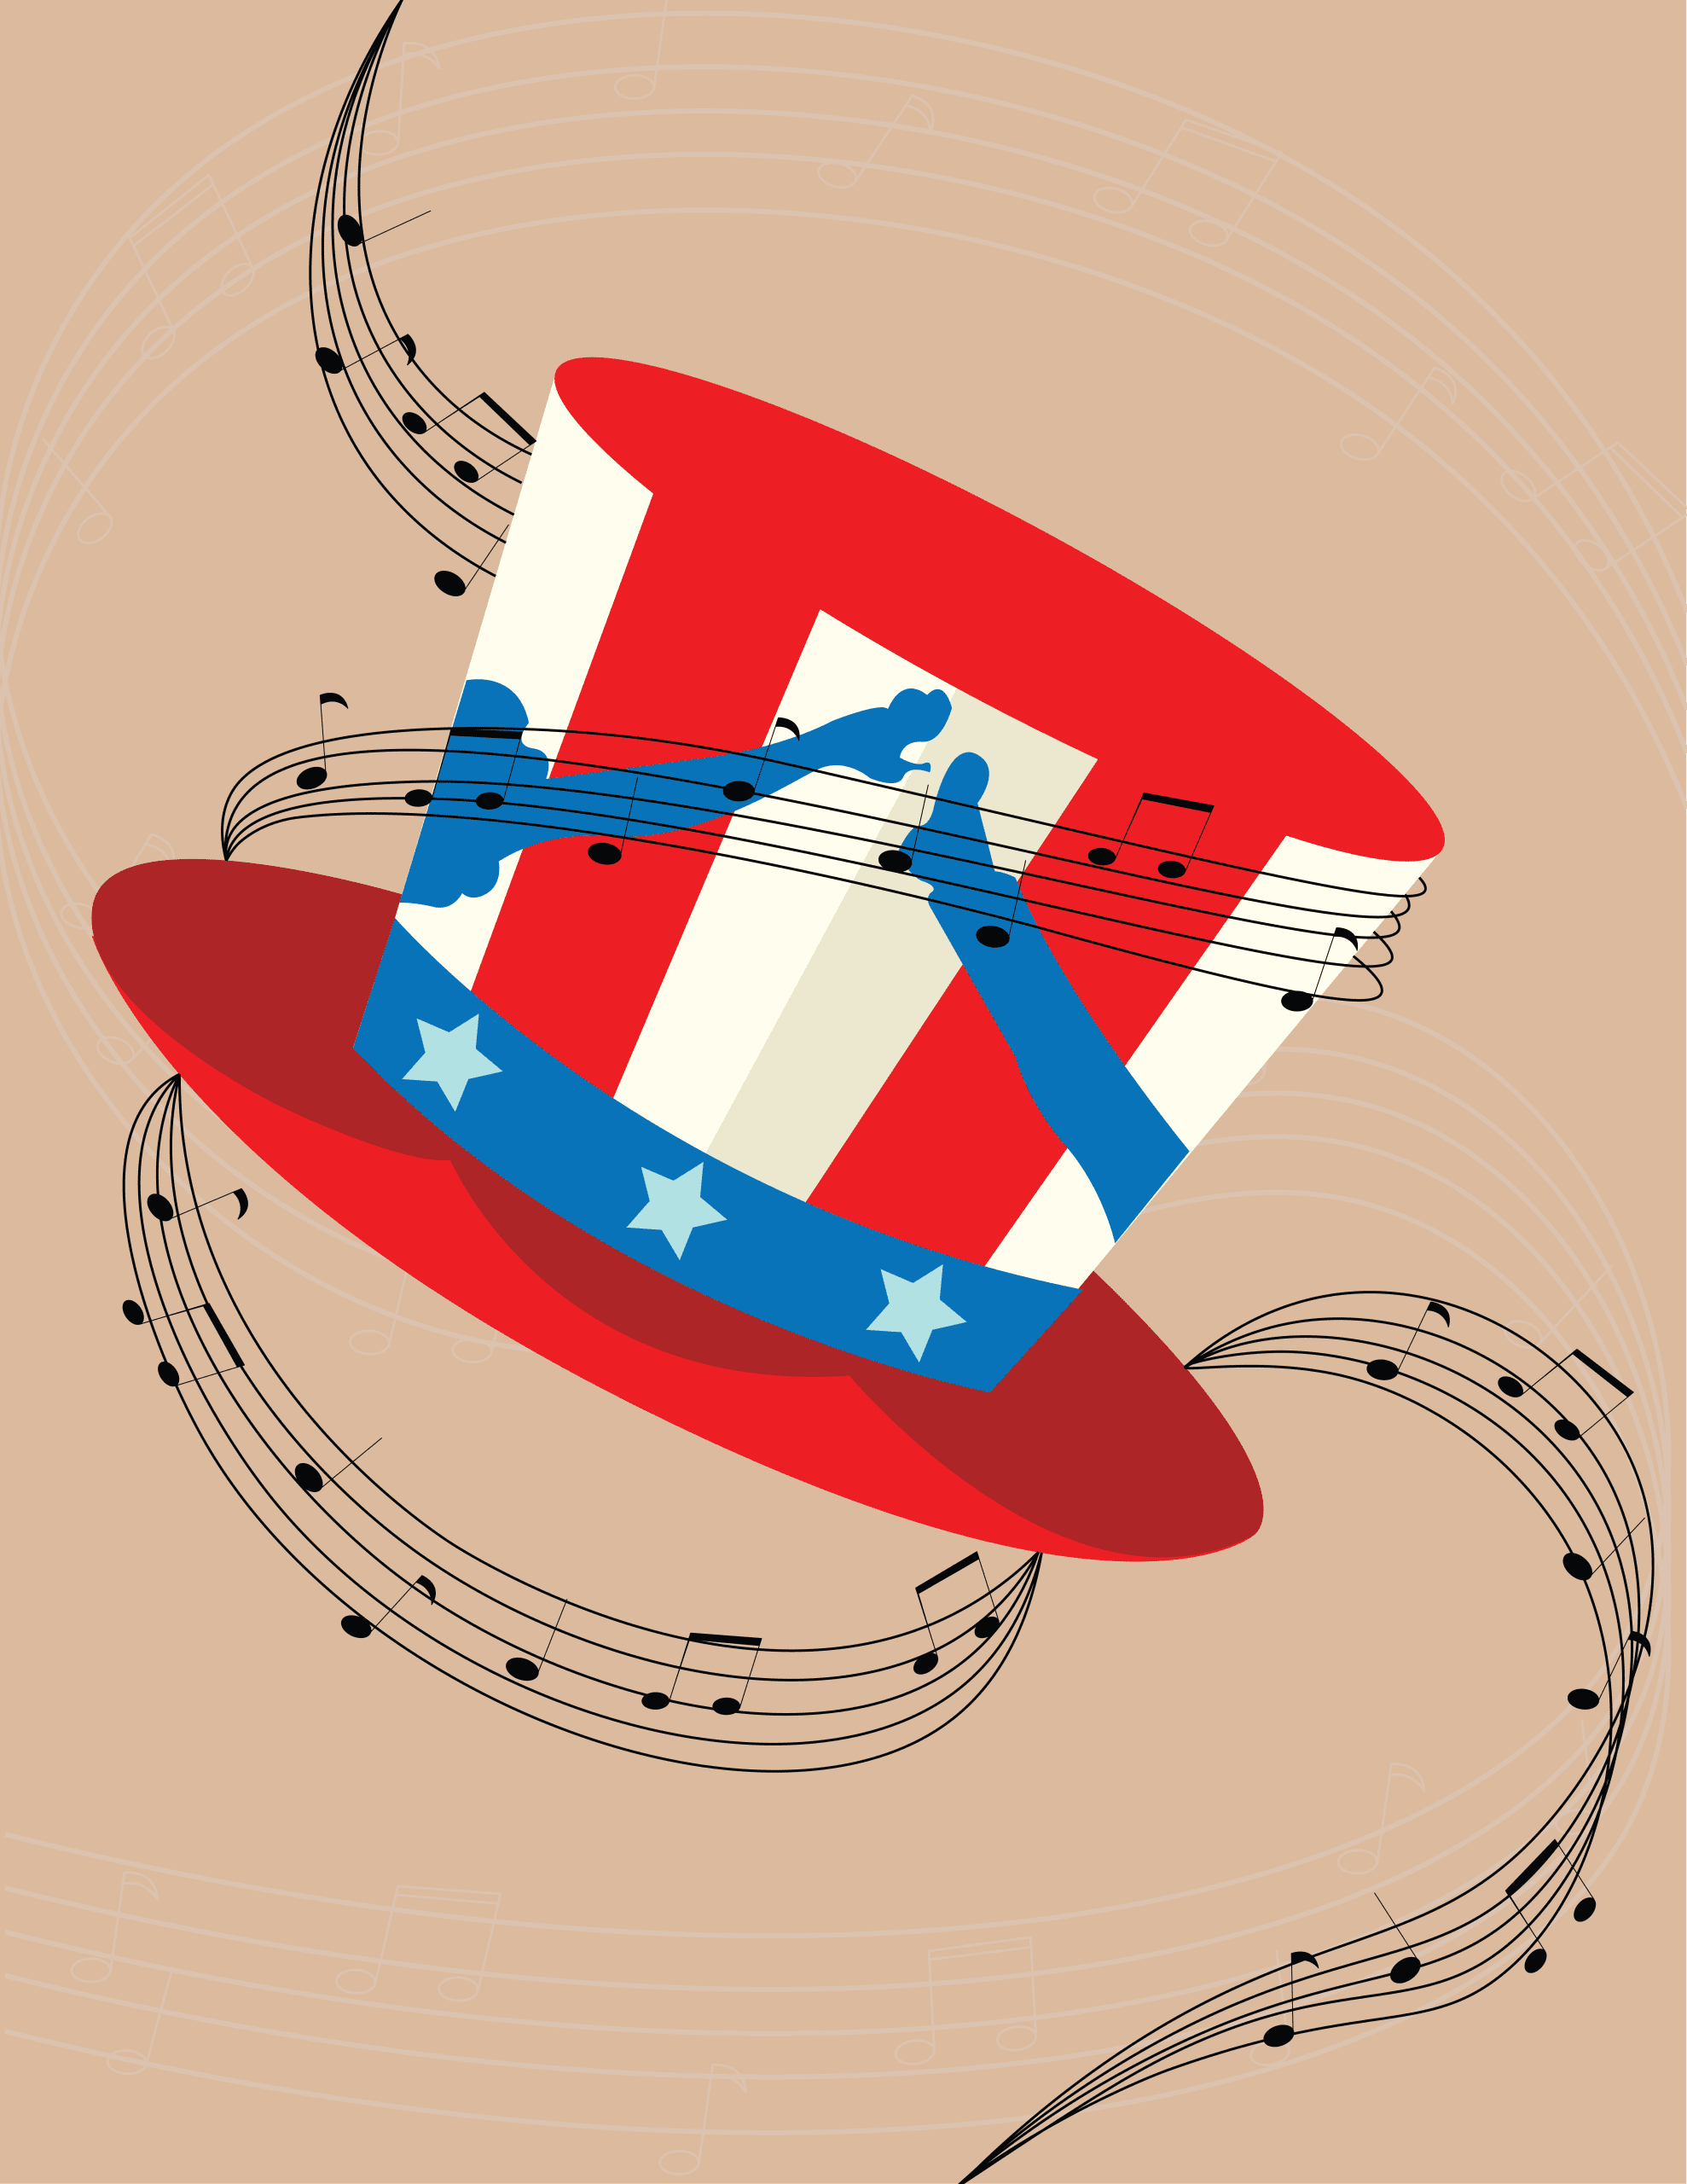 Voices Raised for Vets poster, featuring an Uncle Sam hat with swirling music notes surrounding it over a beige background.